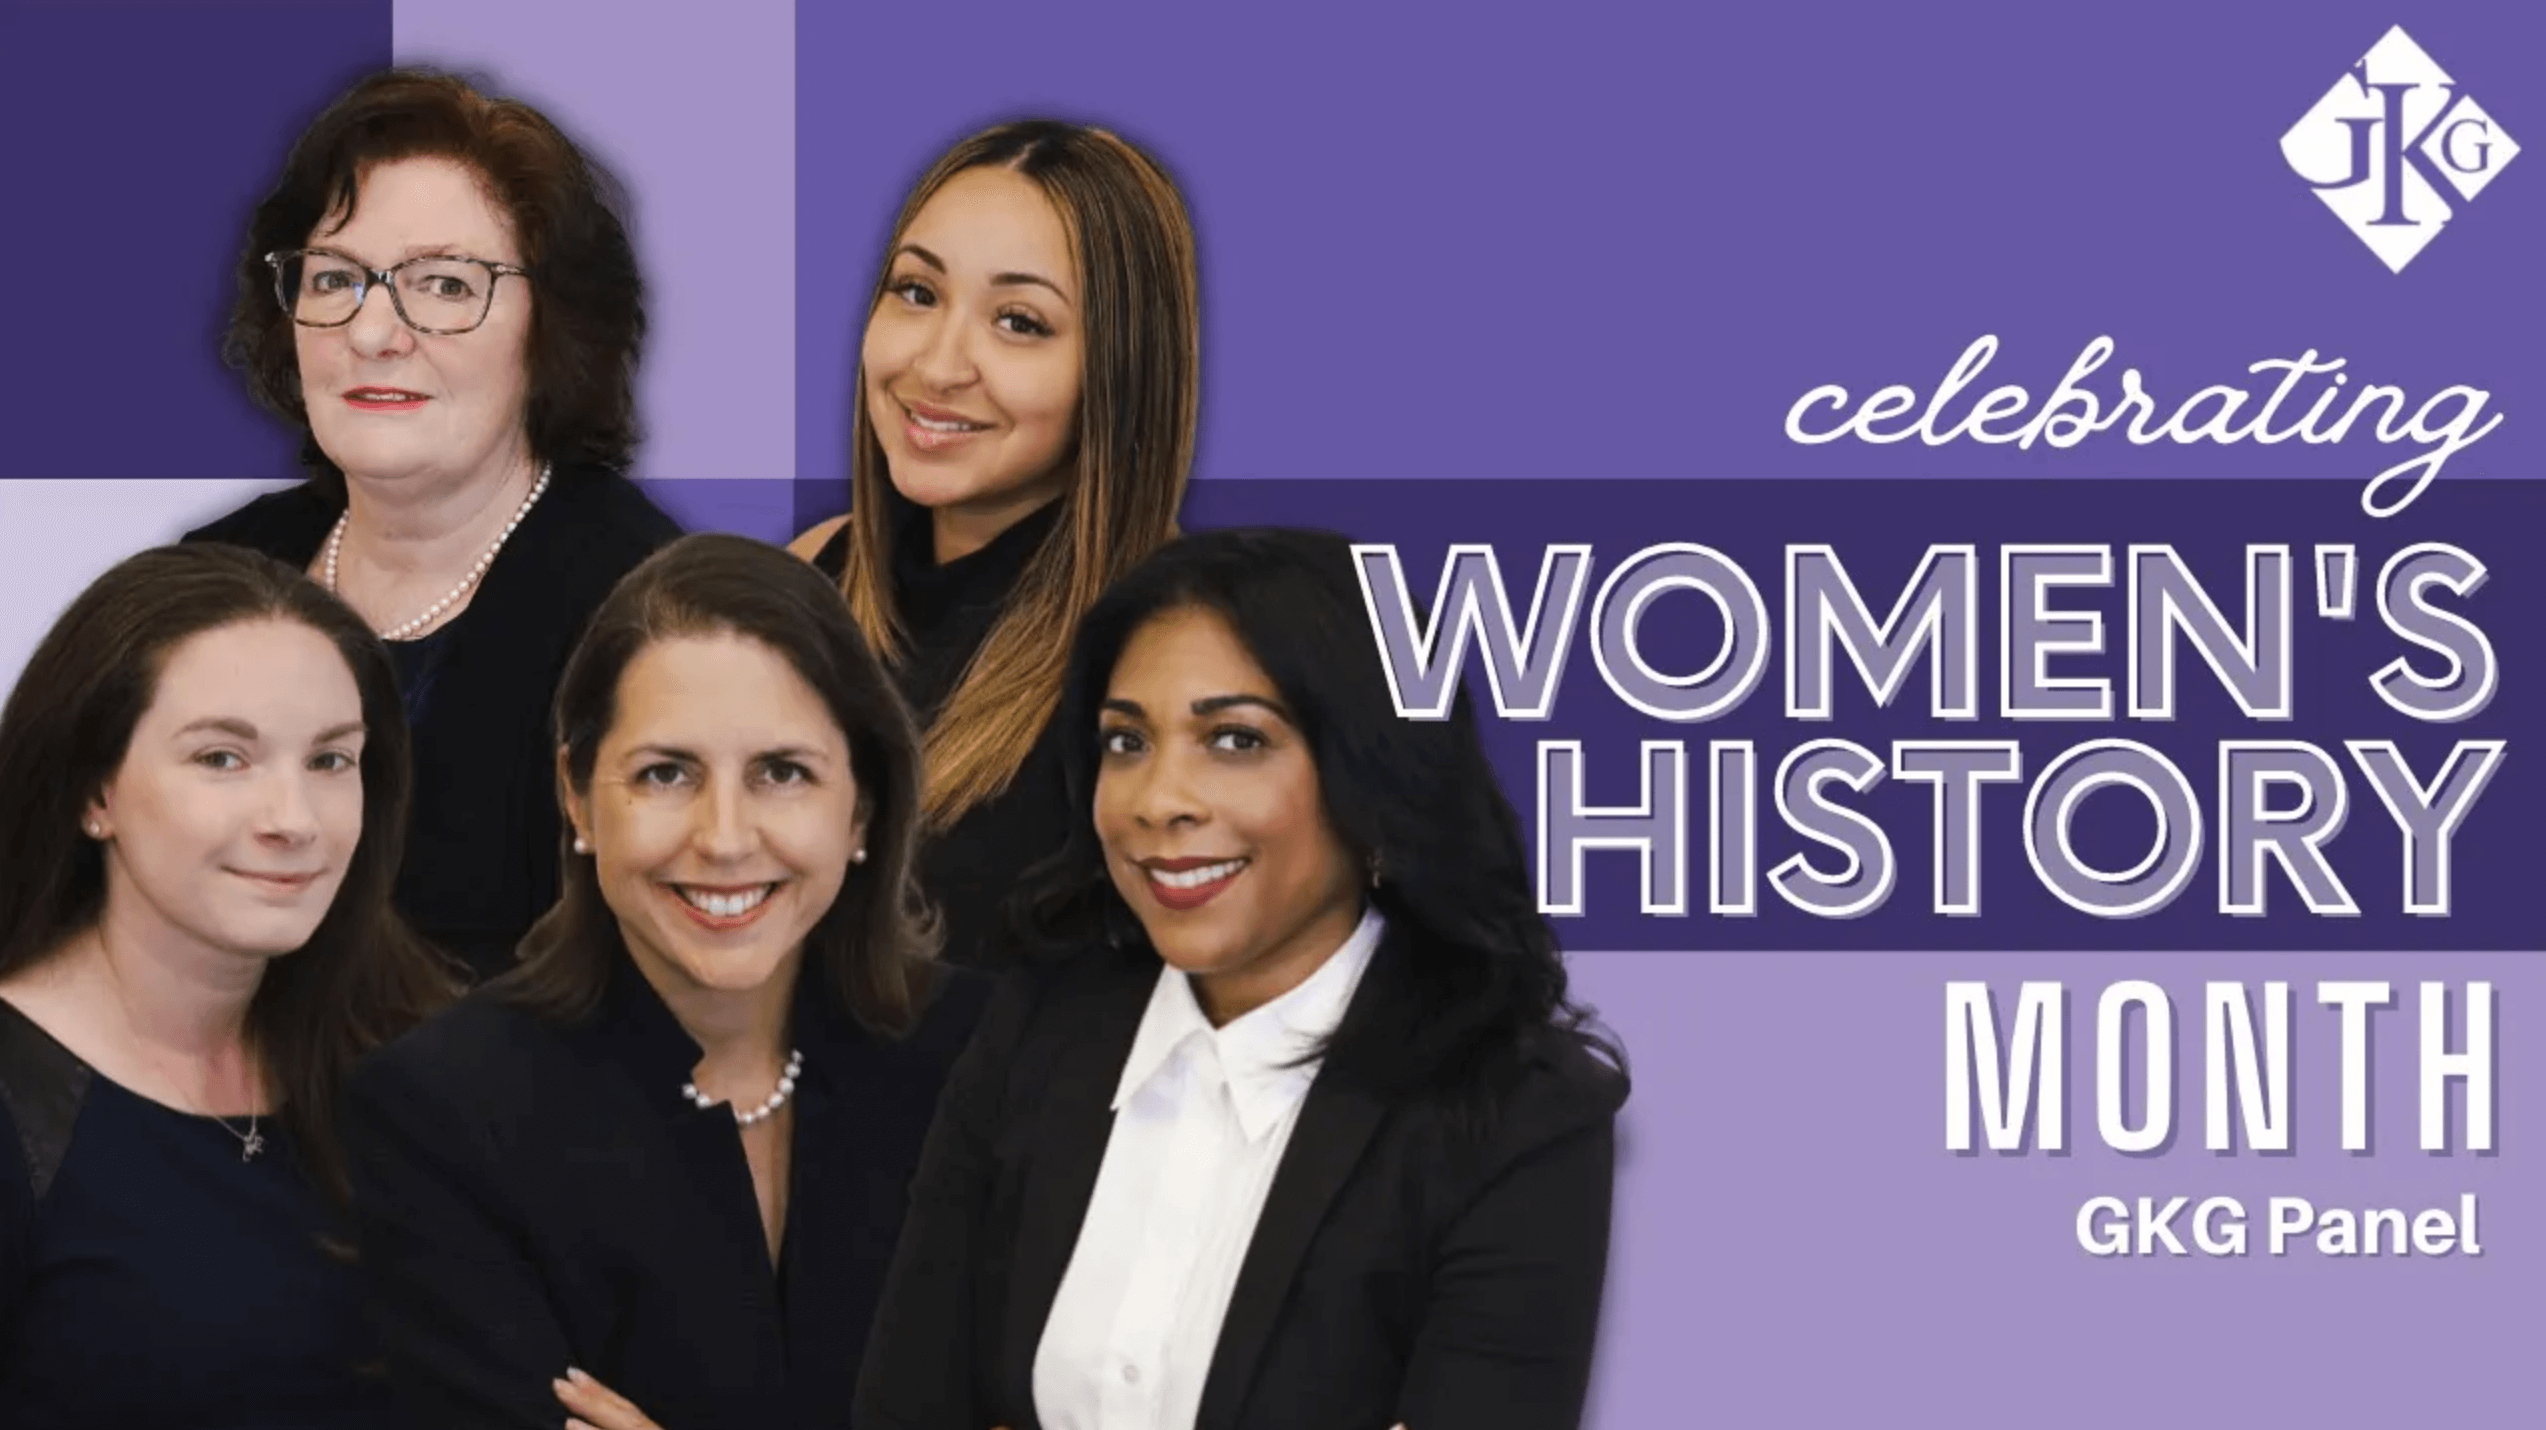 Five diverse women posing for a group photo with a purple background, text reads "Celebrating Women's History Month, Human Resources Operations panel.